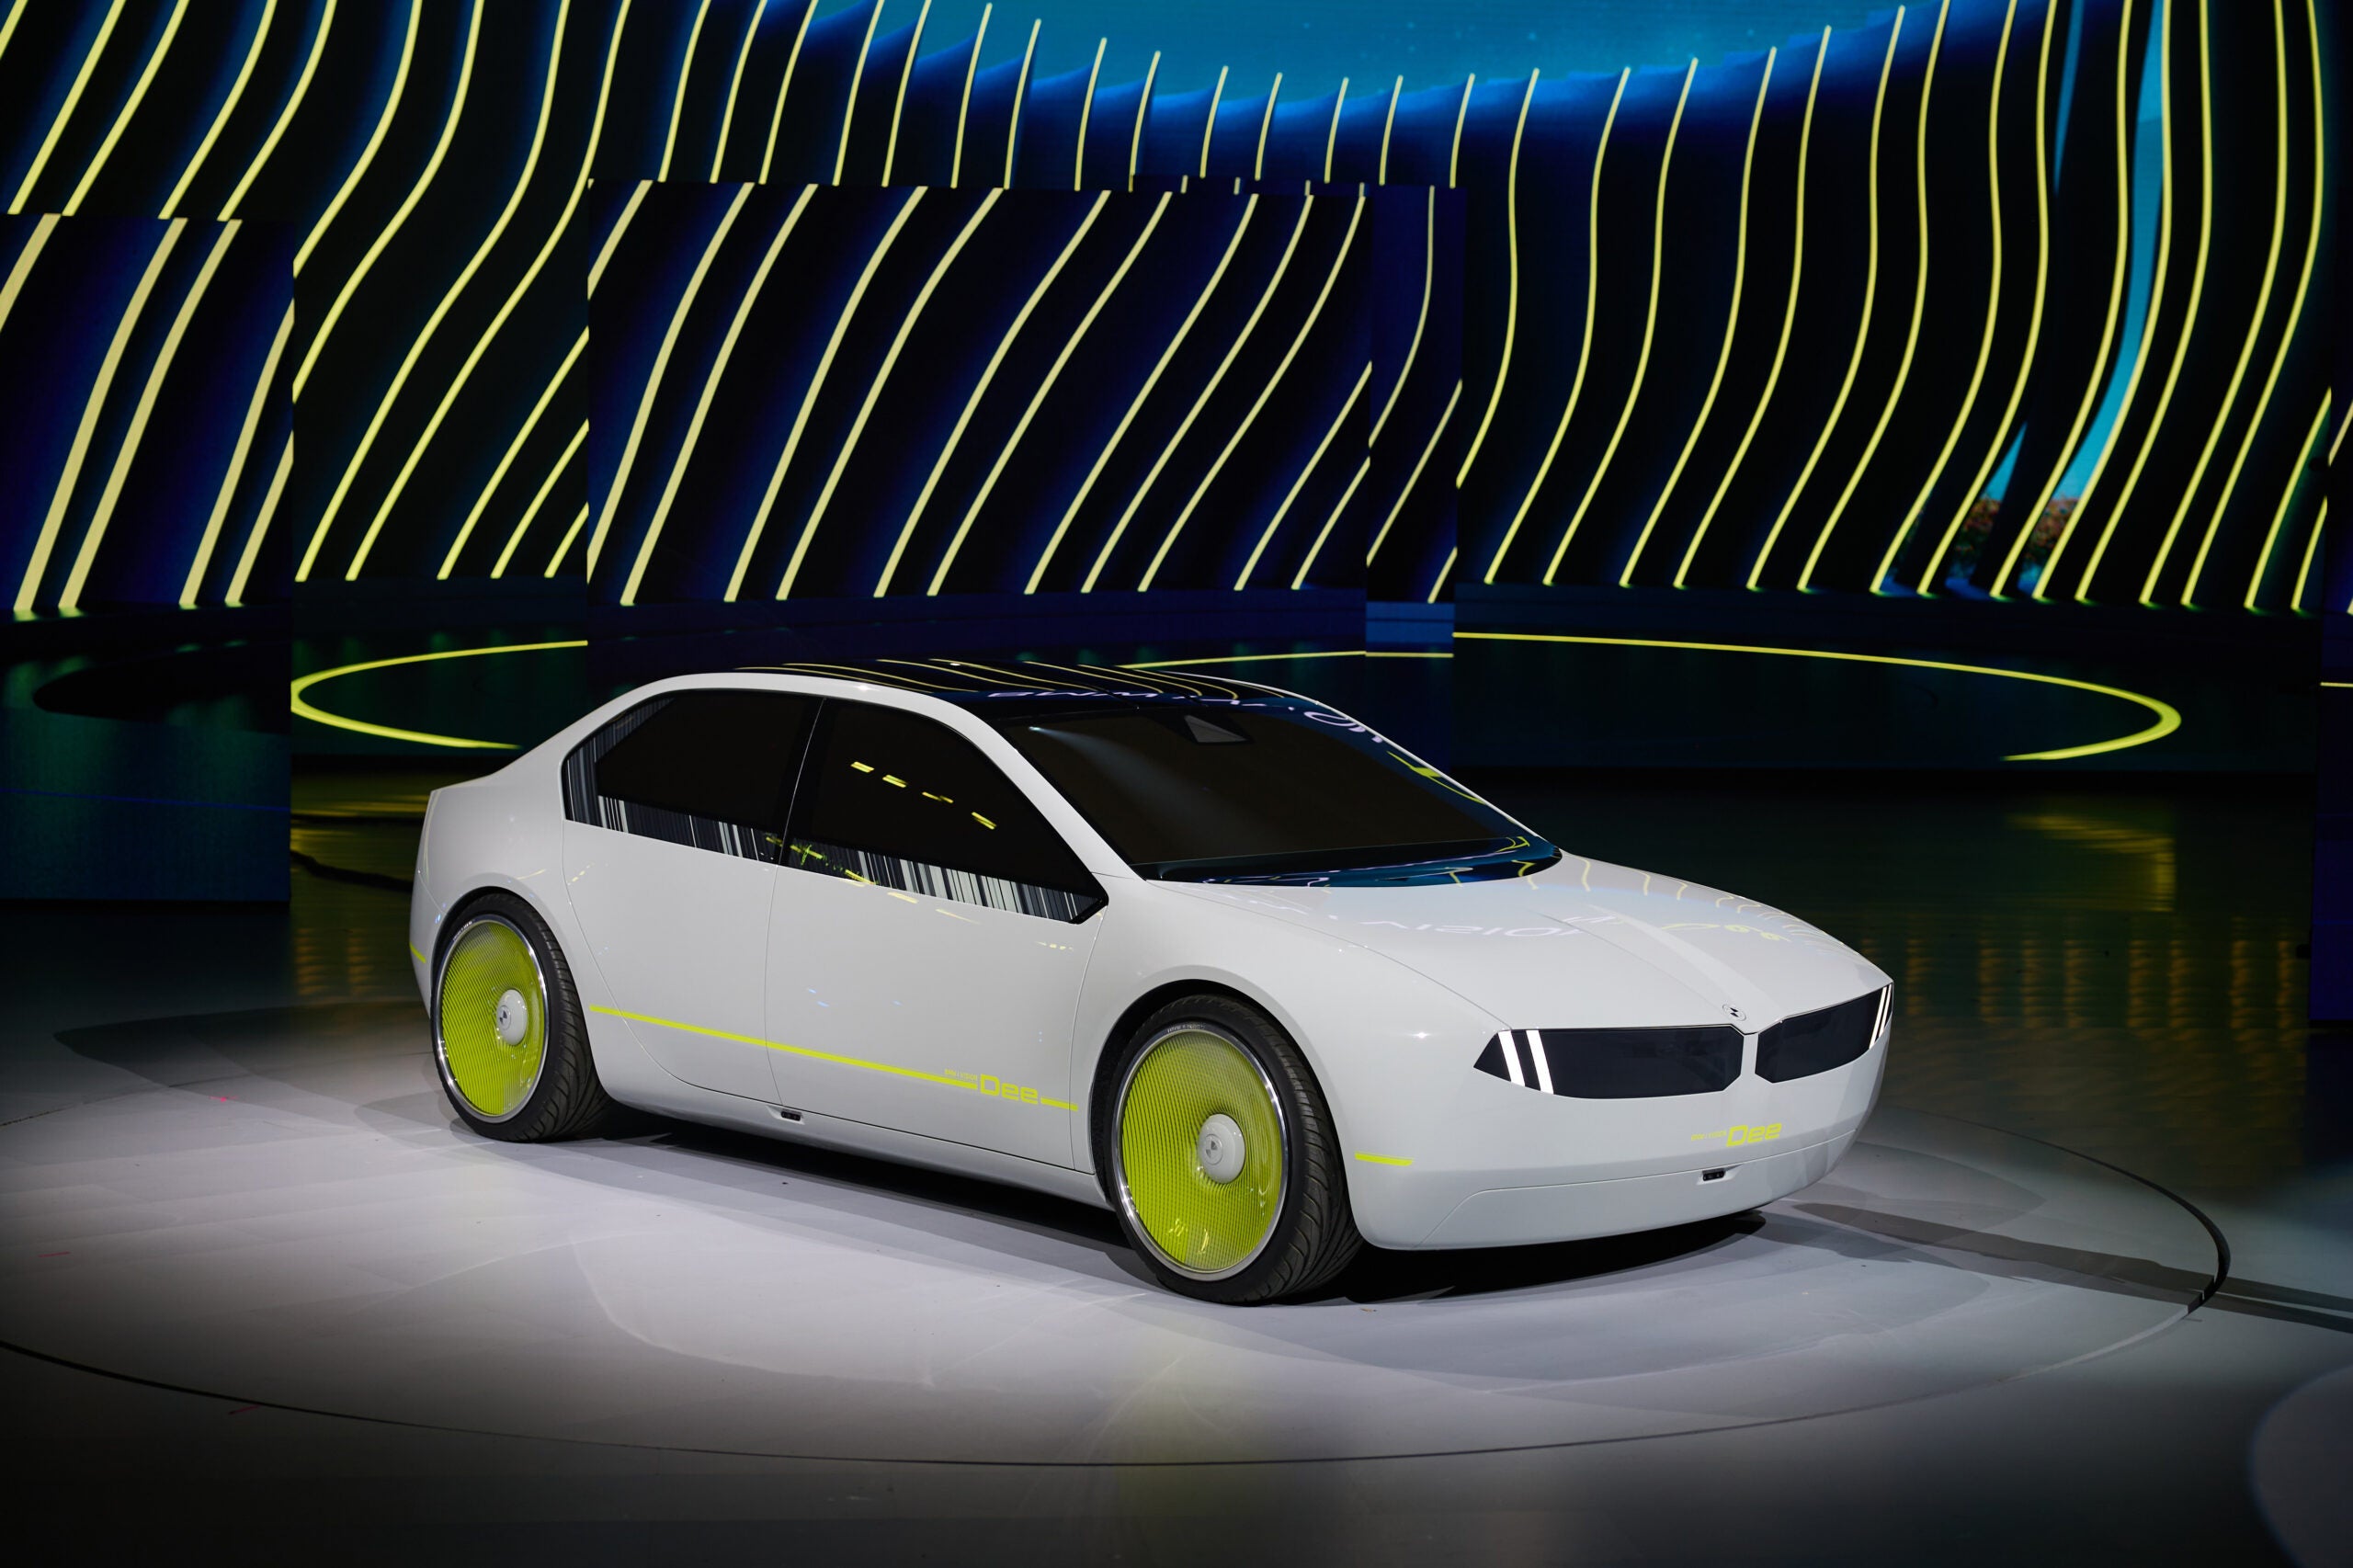 A white Dee BMW electric concept car on a stage